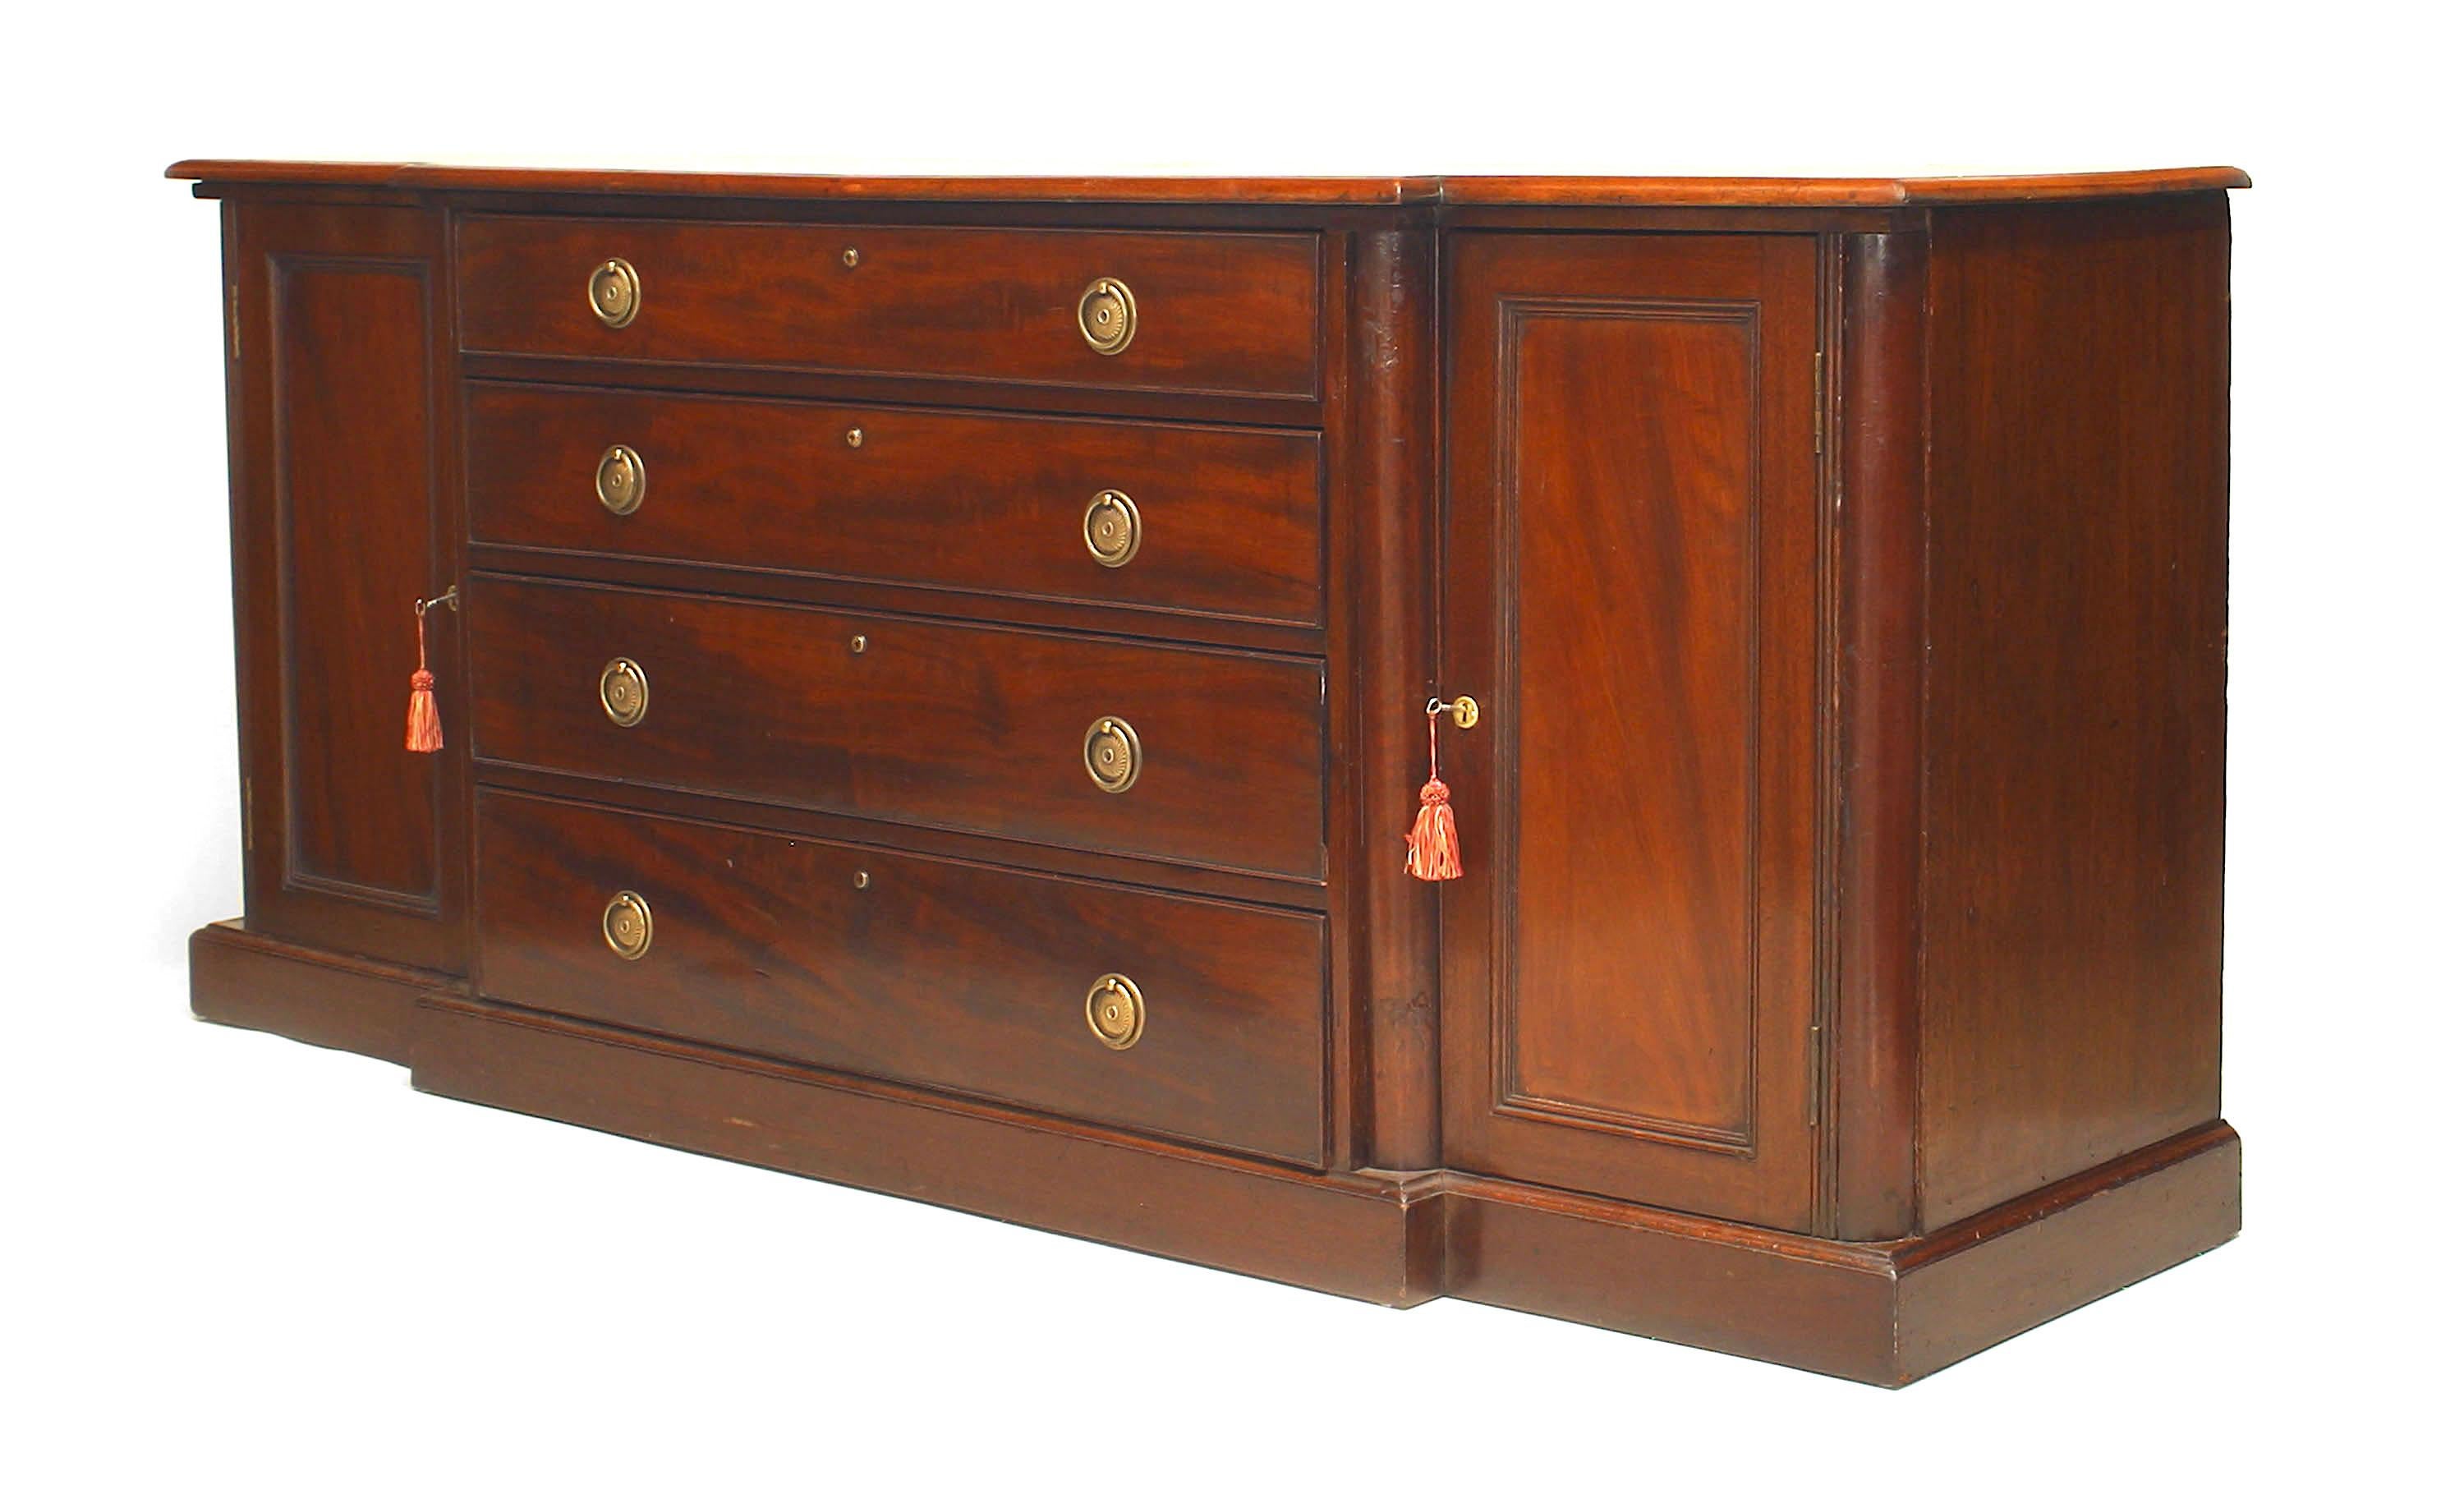 English Georgian style (19th century) mahogany sideboard with two doors flanking a breakfront centered group of drawers with a banded inlaid top.